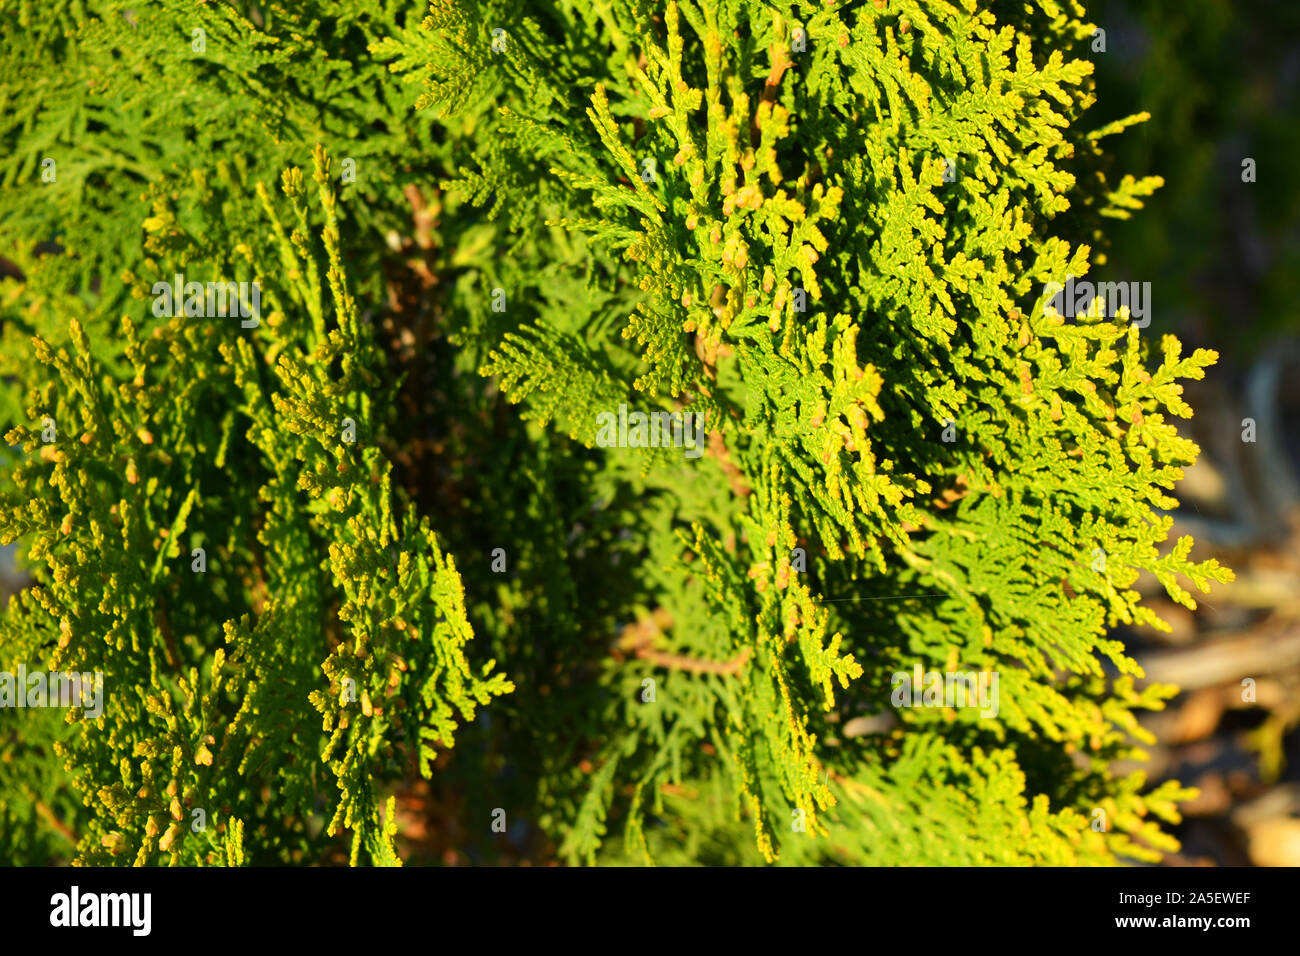 Branches and scaly leaves of a cypress plant. Thuja species orientalis Aurea Nana, arborvitaes, thujas or cedars in the light of the bright autumn sun Stock Photo